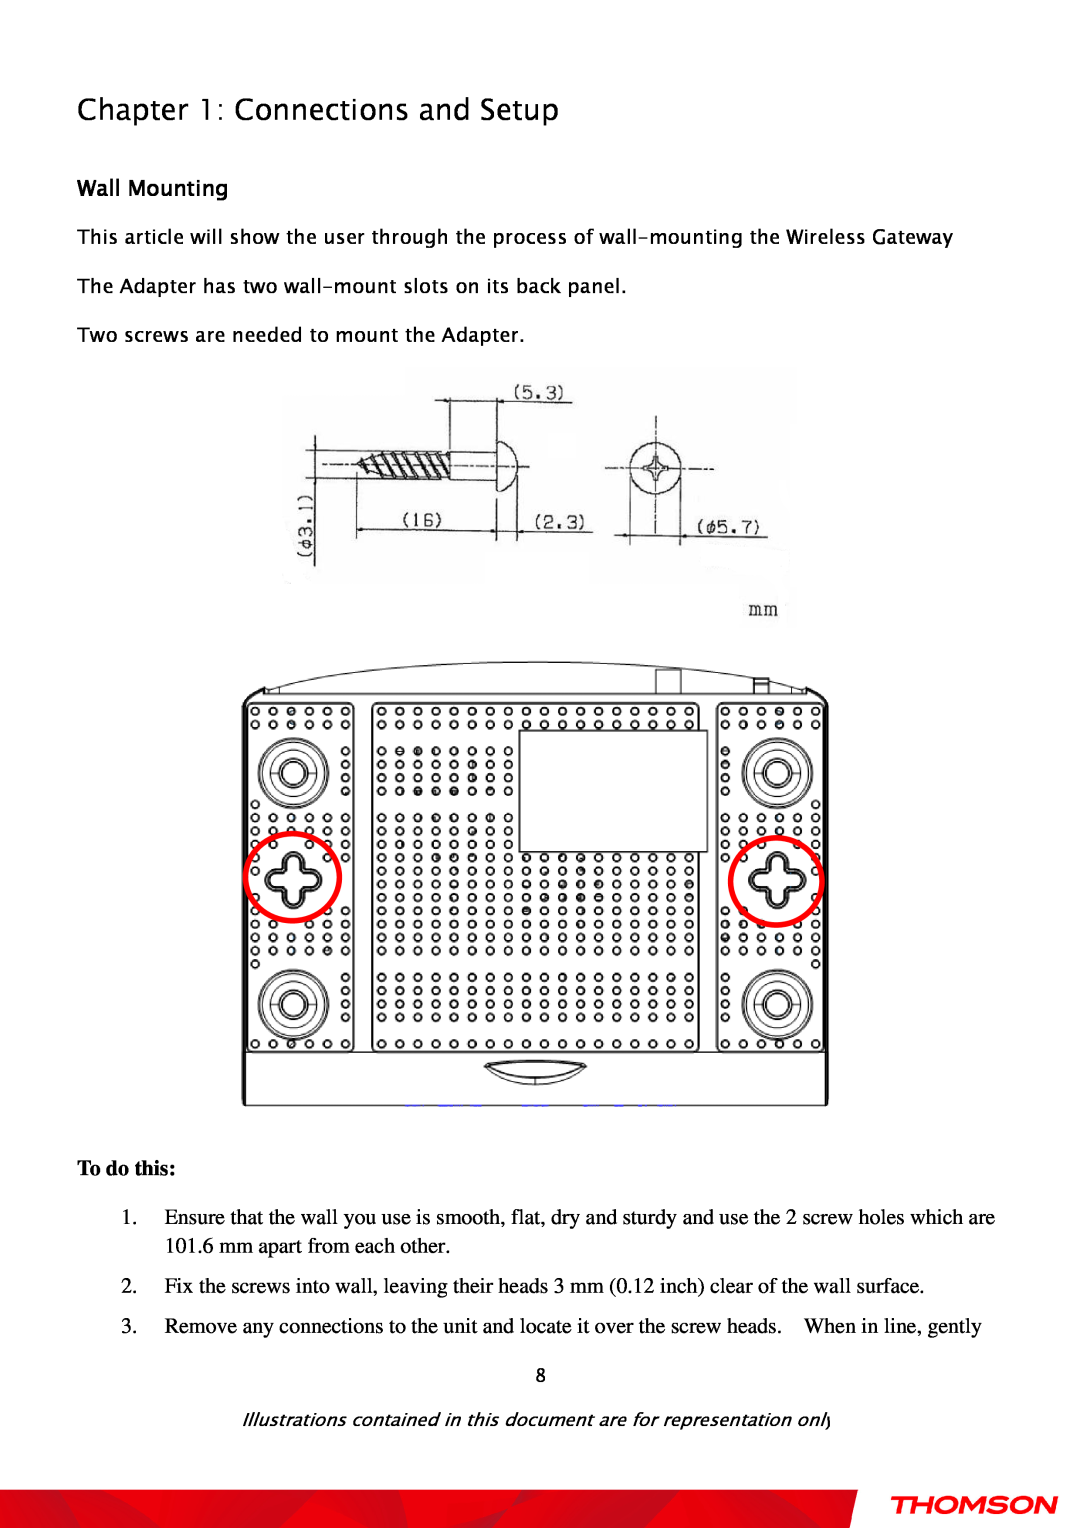 Gateway TWG870 user manual To do this, Connections and Setup, Wall Mounting 